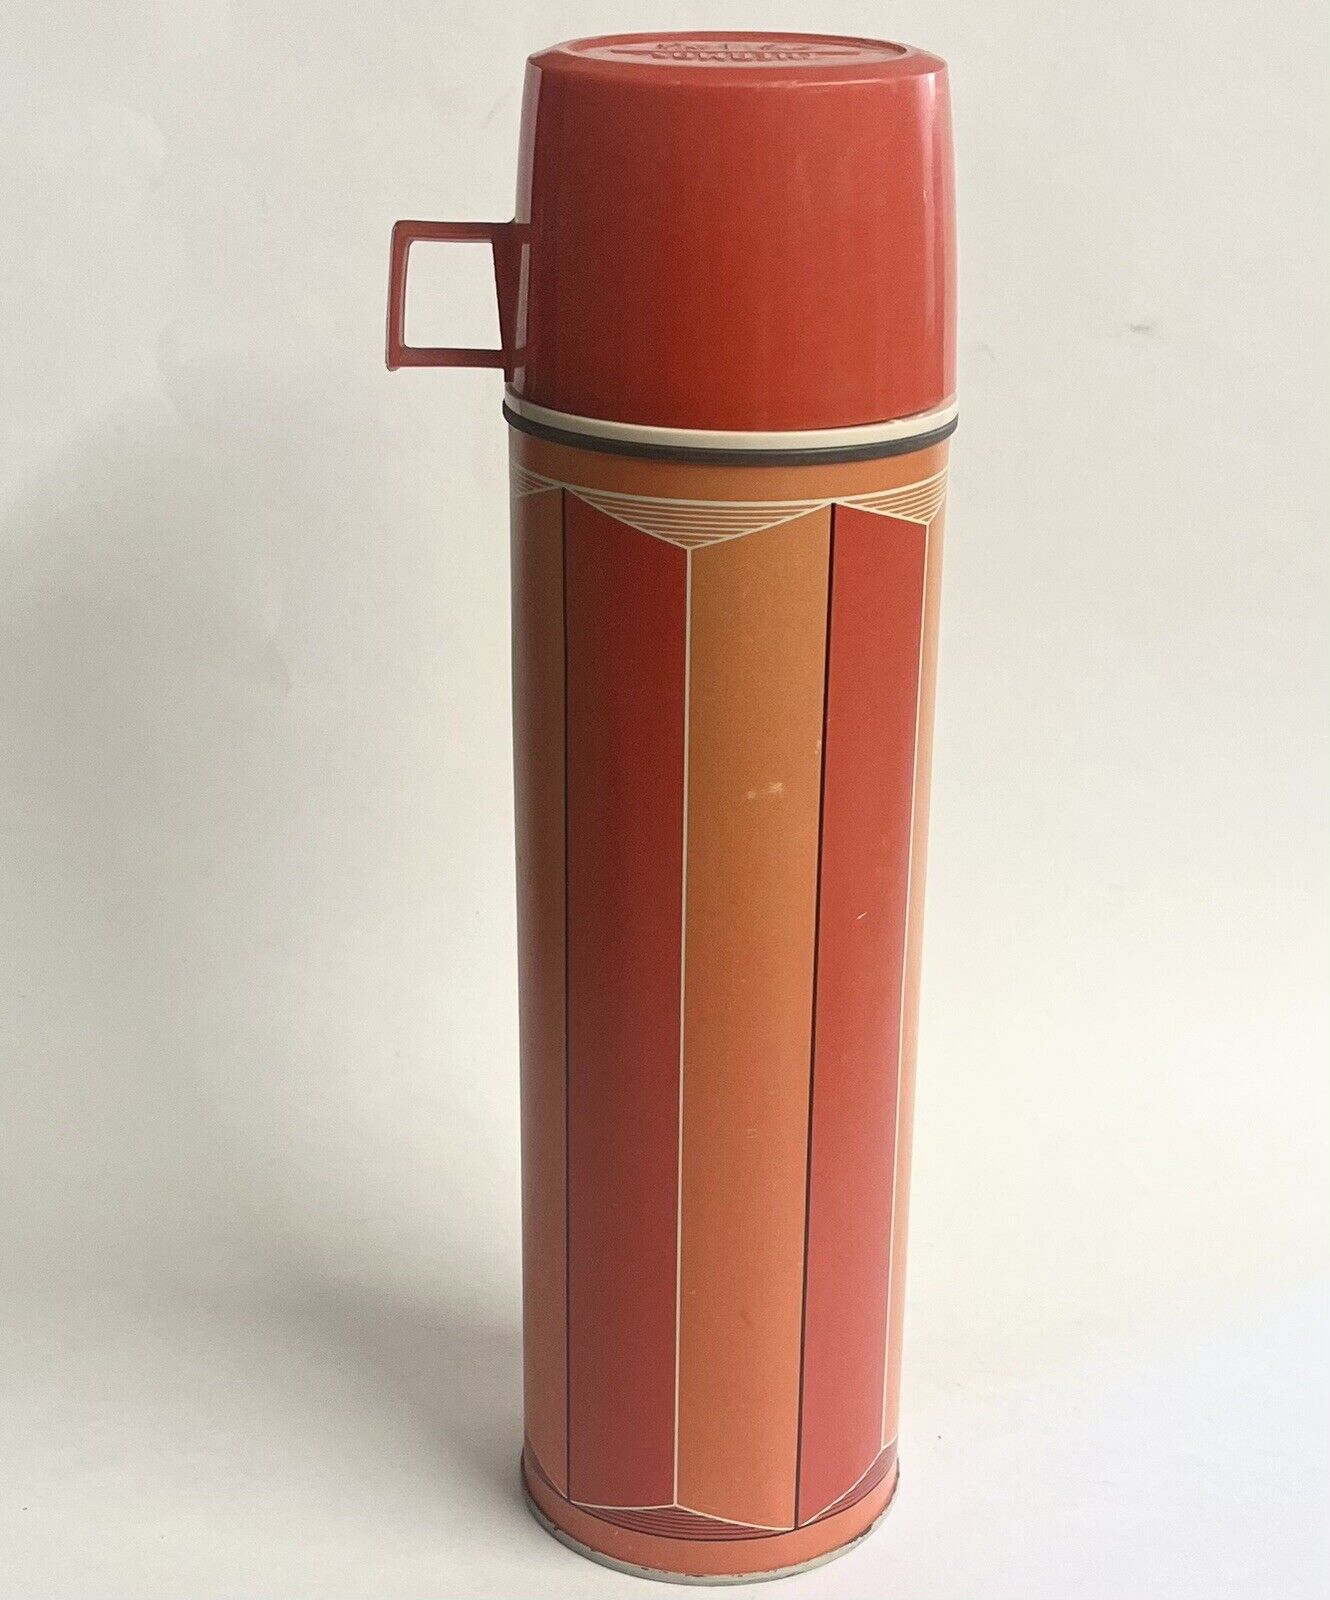 Vintage 1974 King-Seeley Thermos #2410 Red Orange Metal USA Lrg 13.5”T Hot Cold